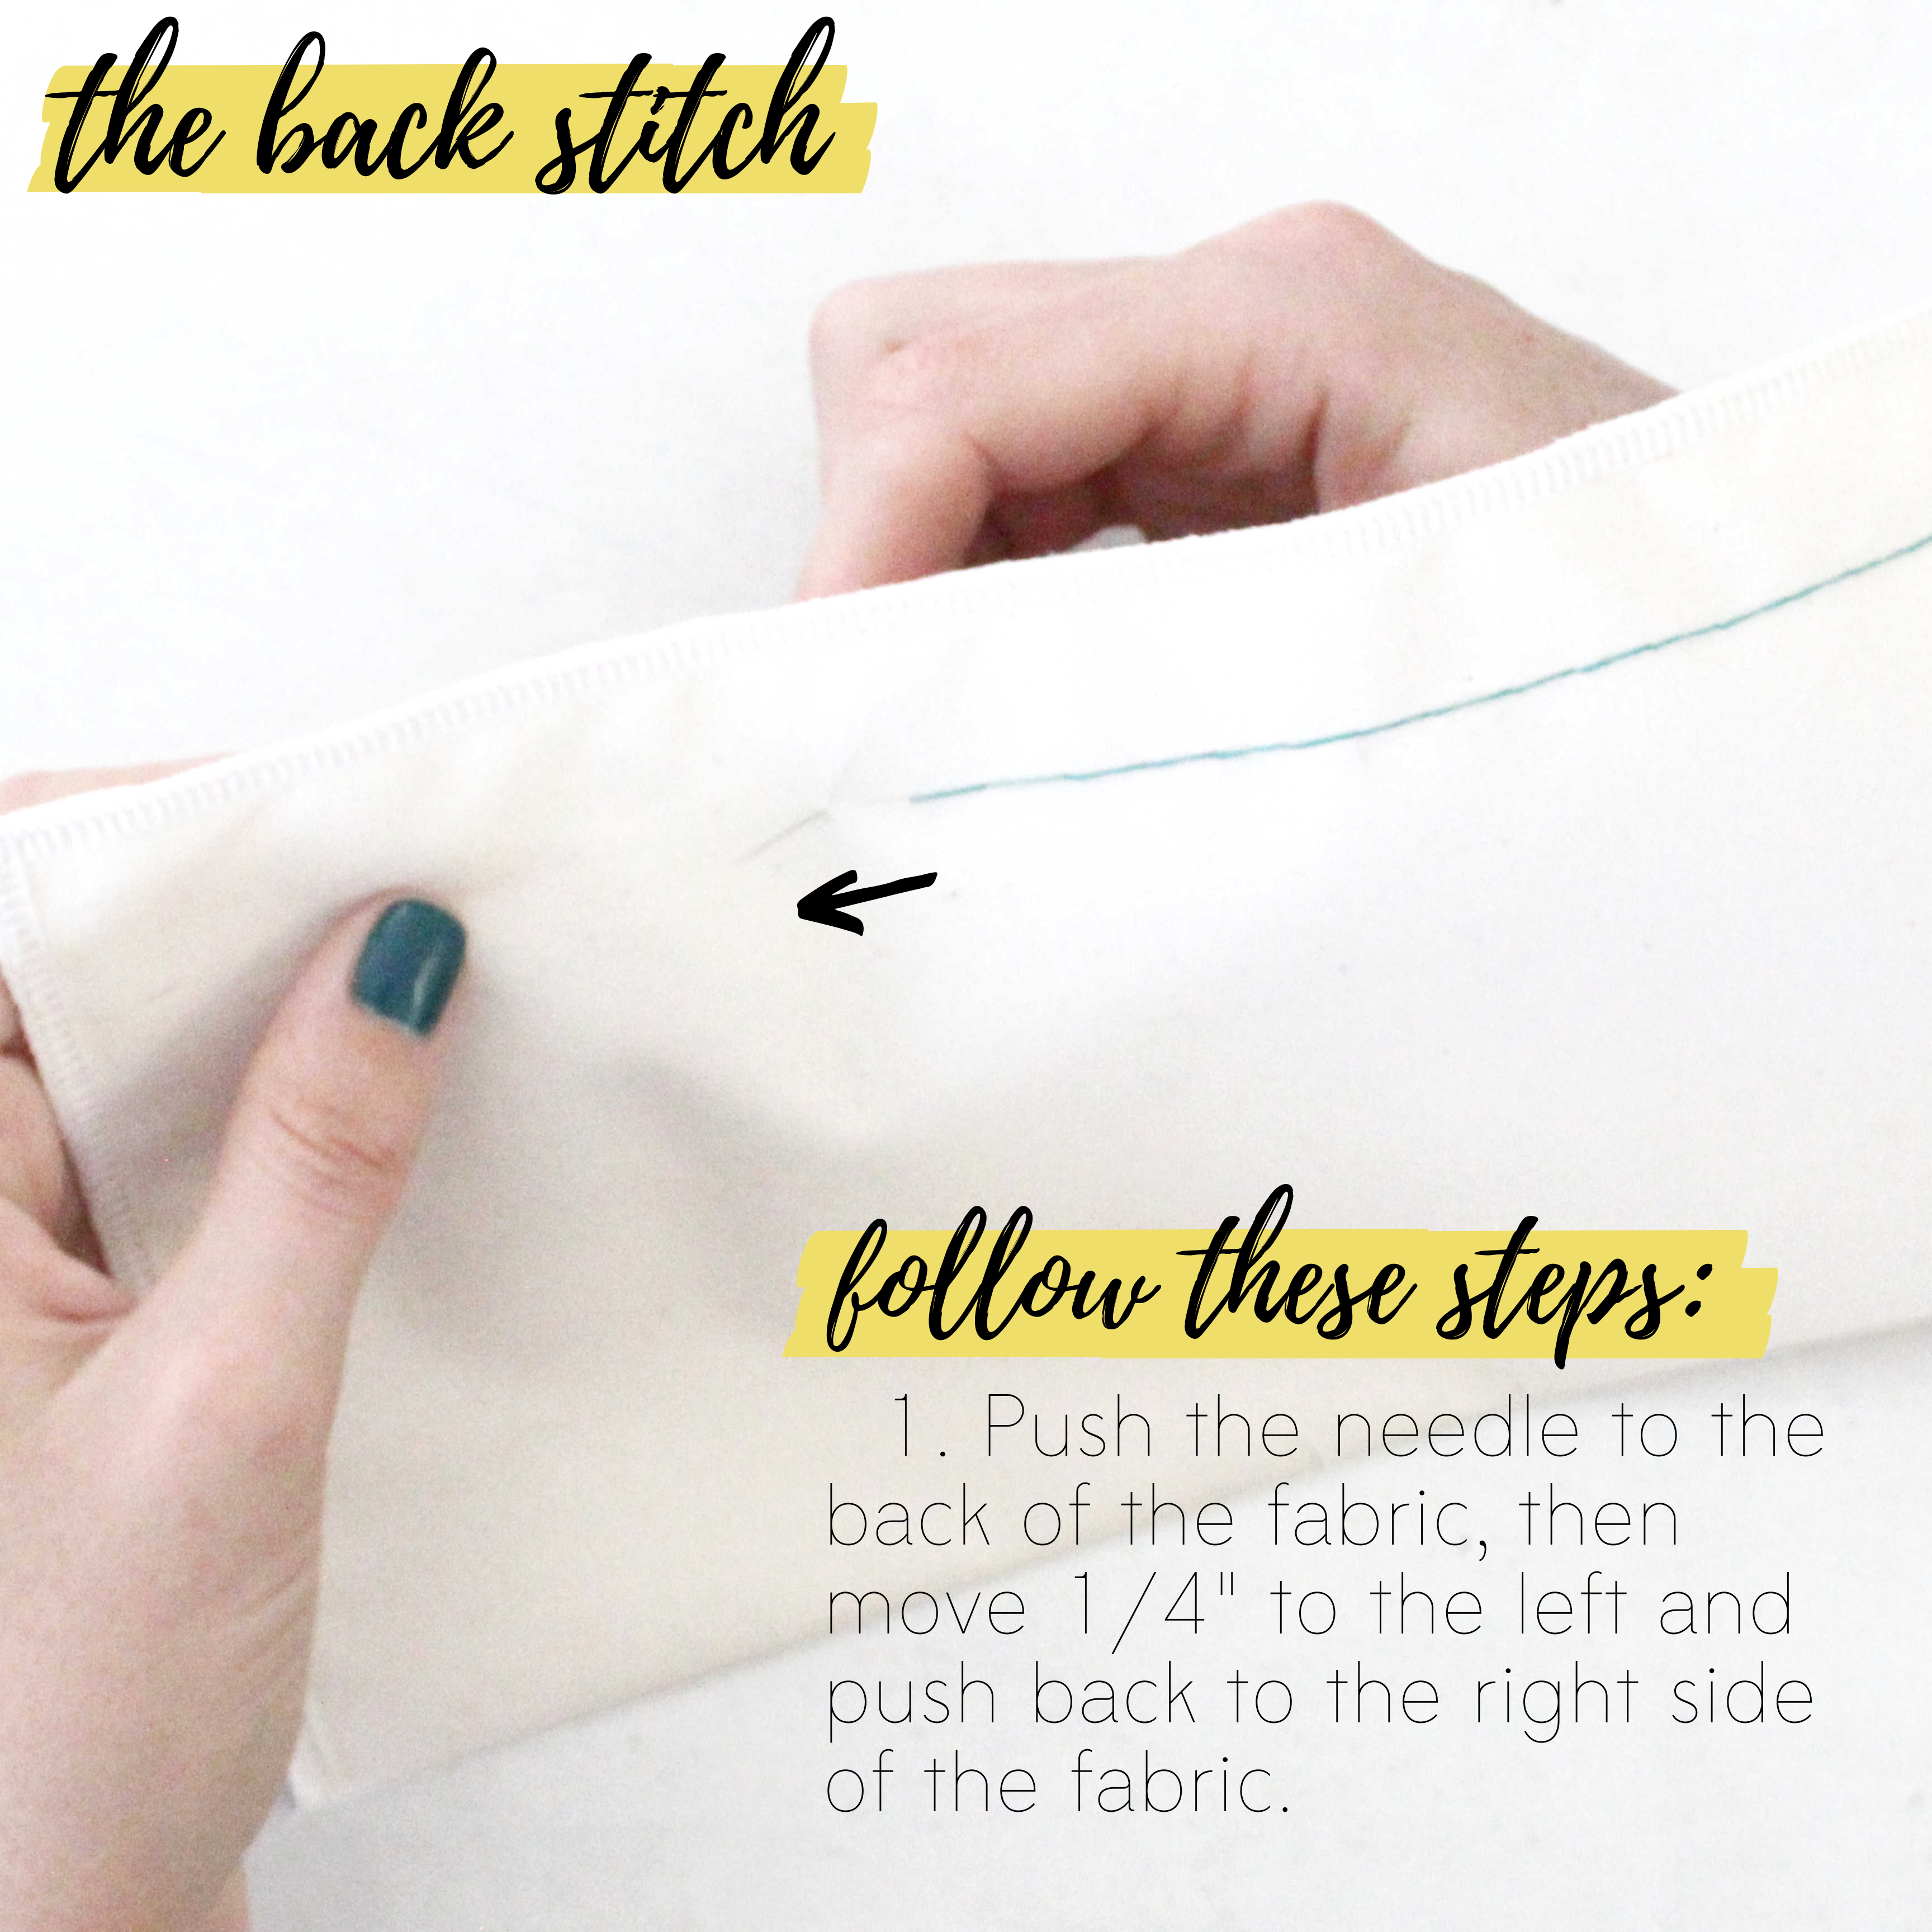 How To Sew Different Types Of Hand Stitches: The Back Stitch